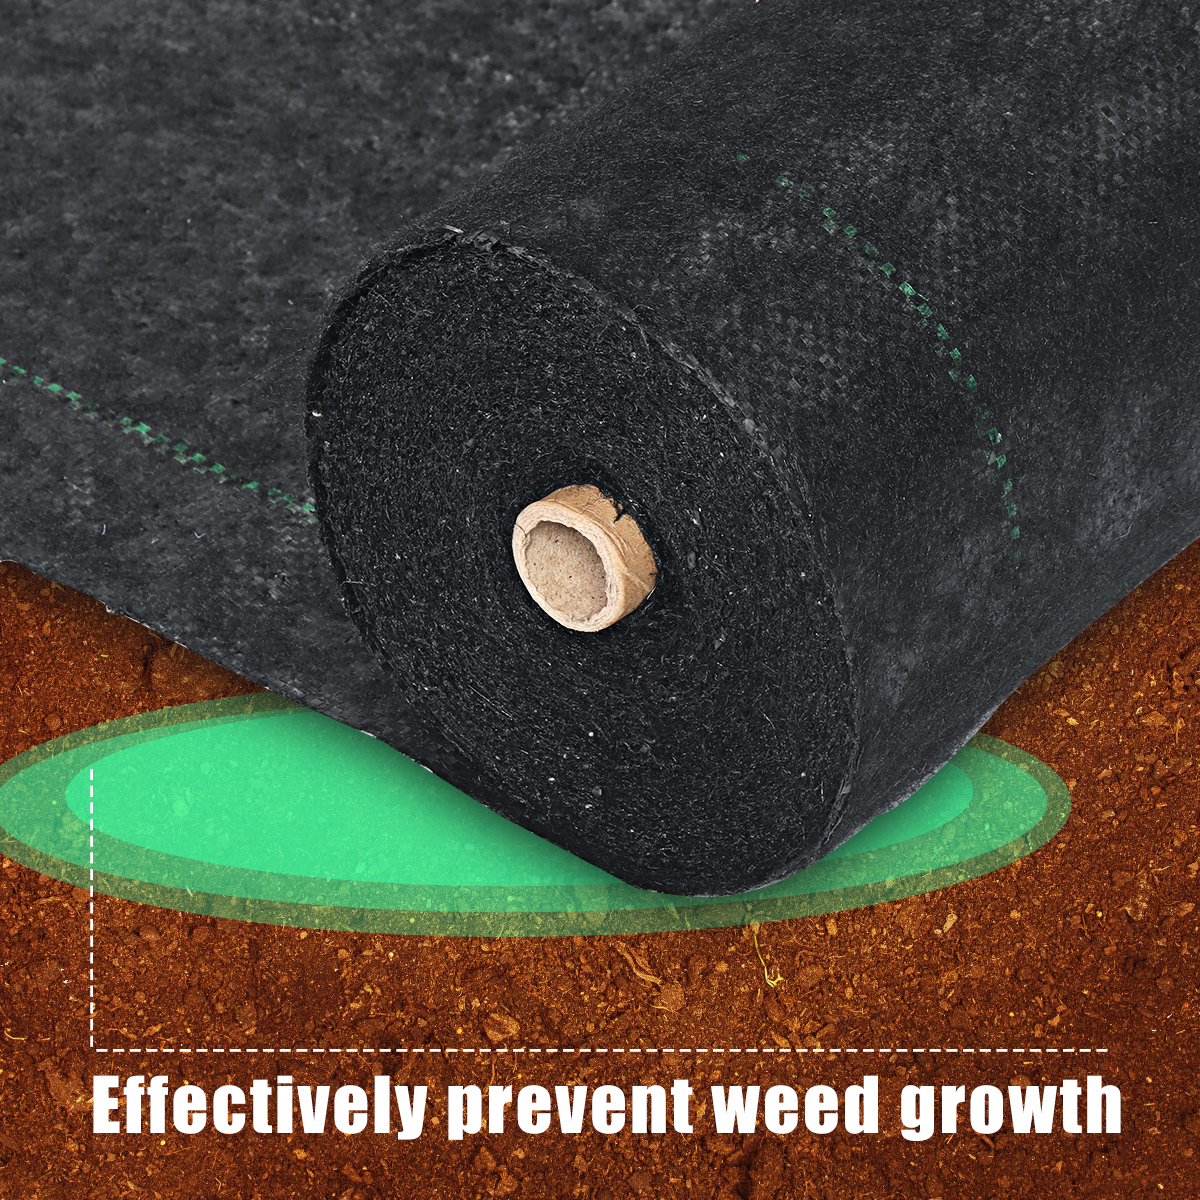 4-x-250ft-Weed-Barrier-Garden-Landscape-Fabric-Durable-Weed-Block-Ground-Cloth-Cover-Agriculture-Gre-1742484-5